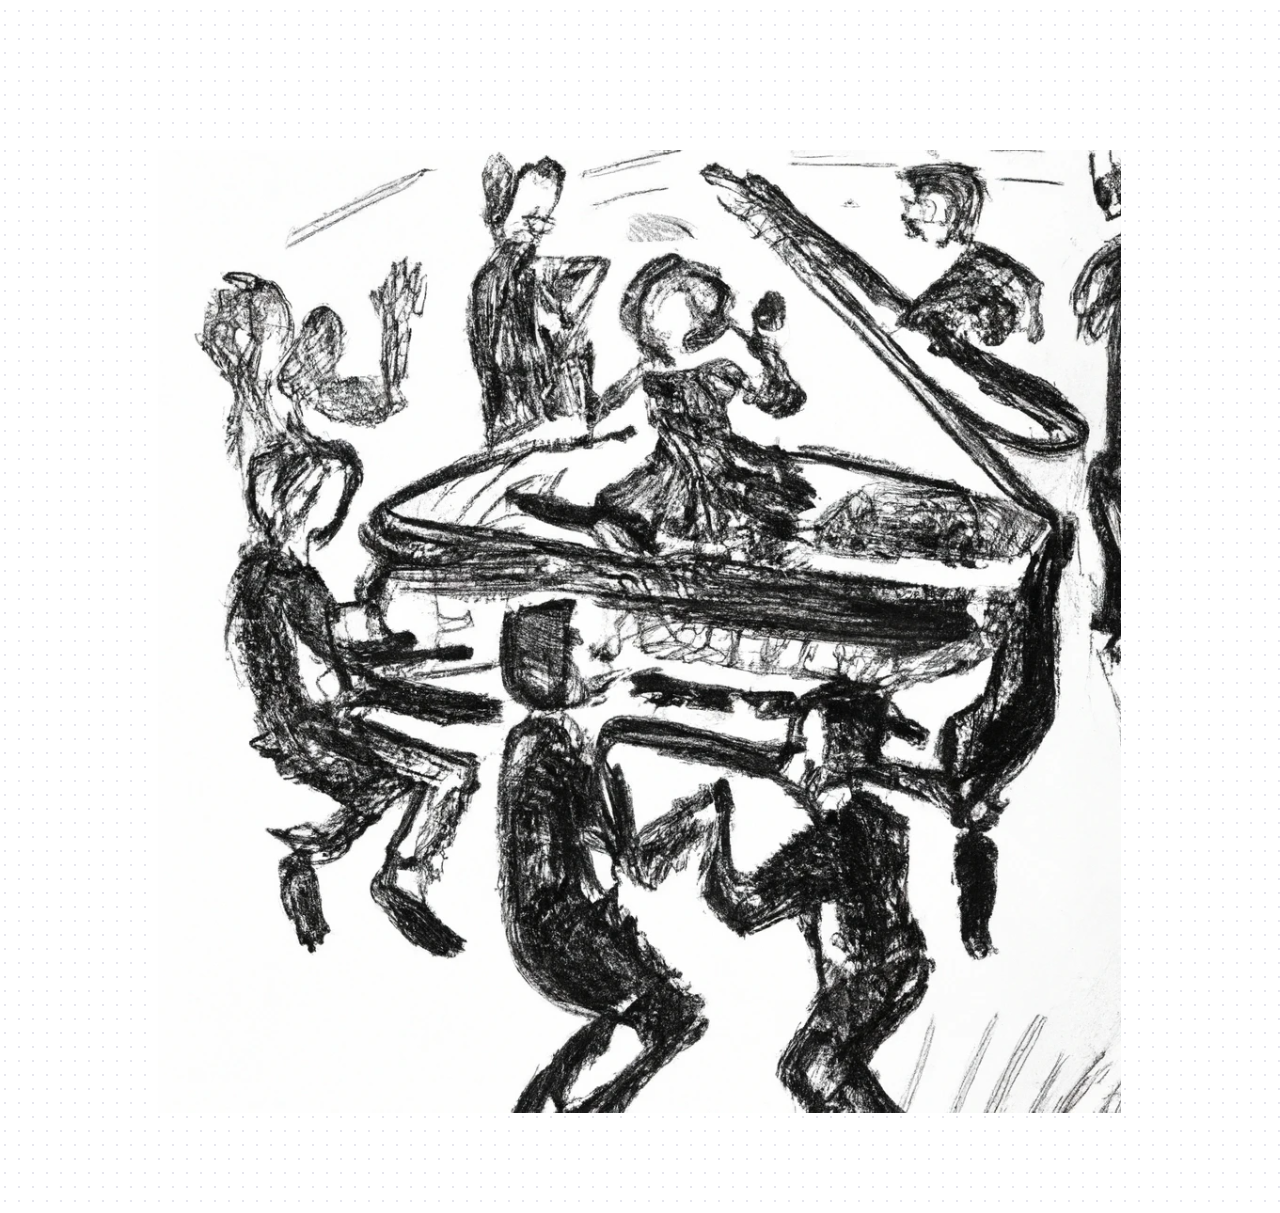 Dall-e2 Query: hatching style, people dancing around piano